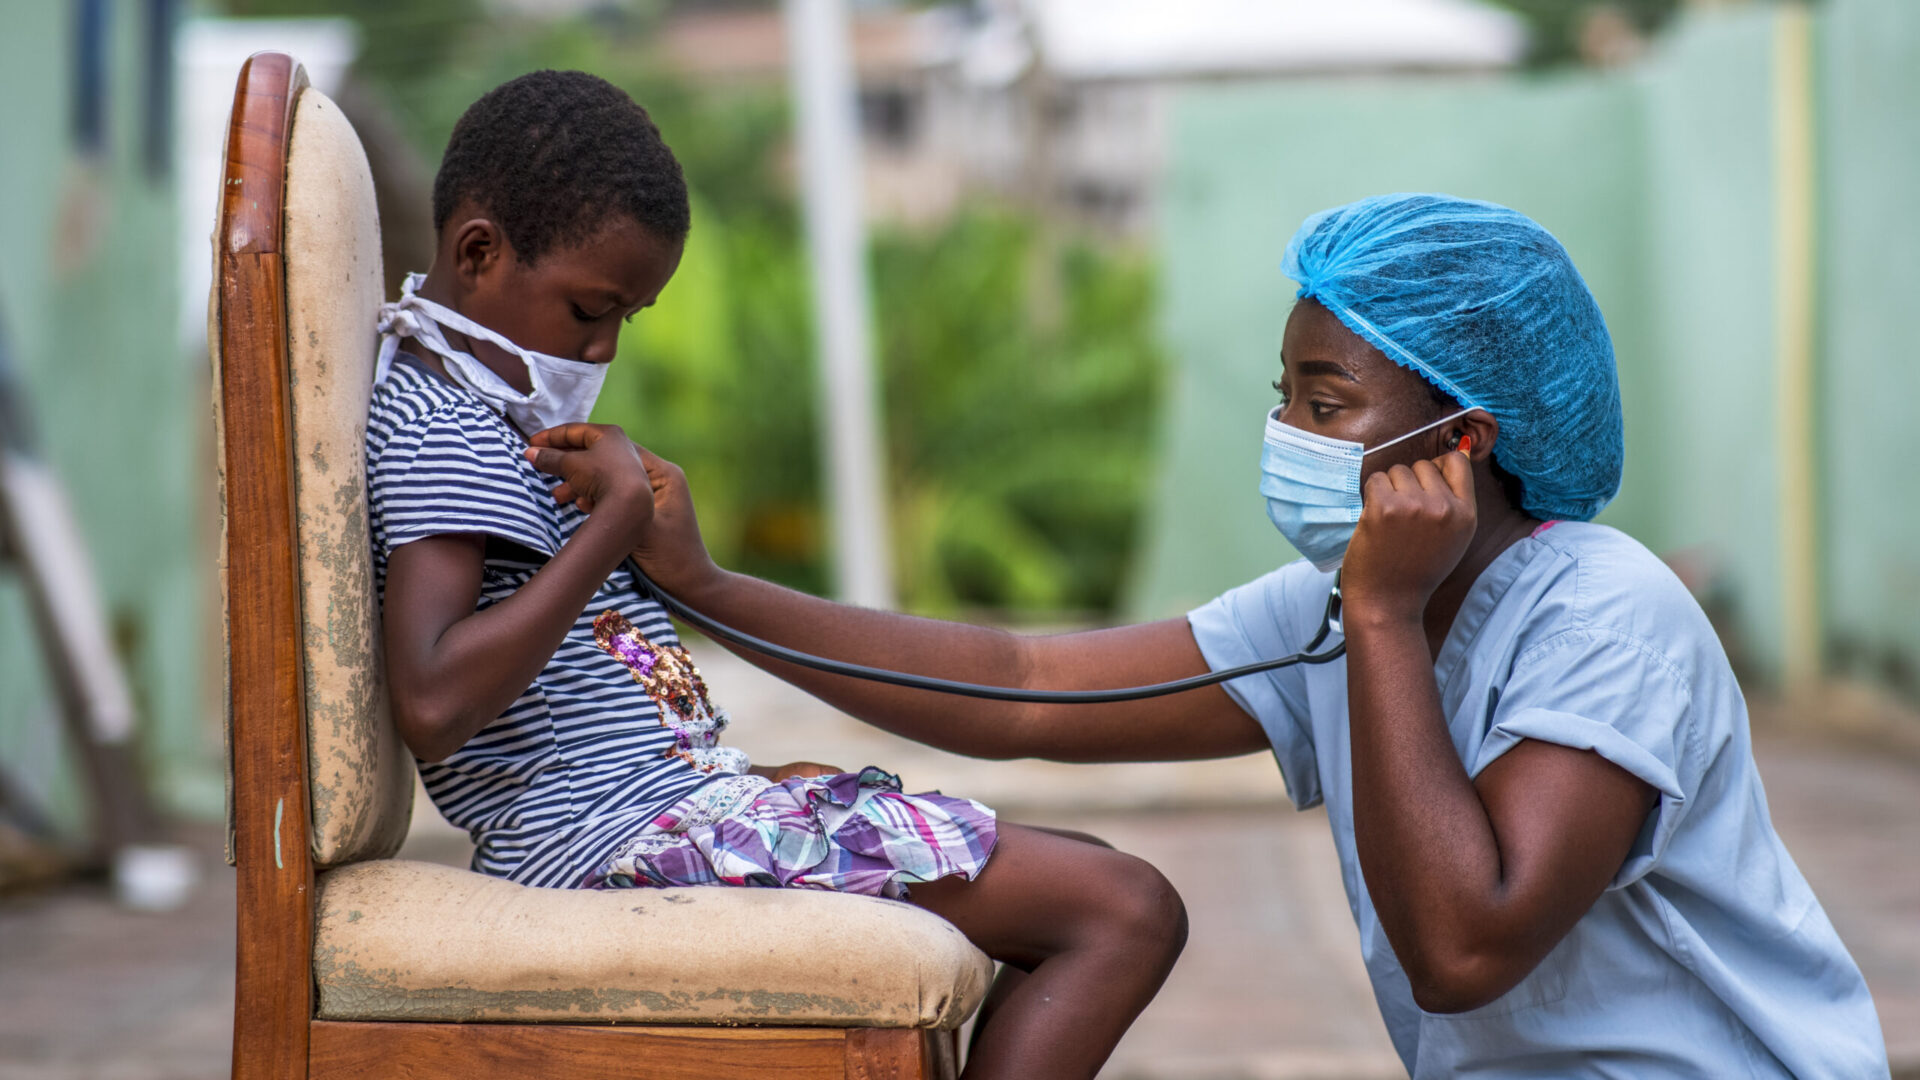 Colonialist Narratives of Projected COVID-19 Effects on Africa Harm the Health of All